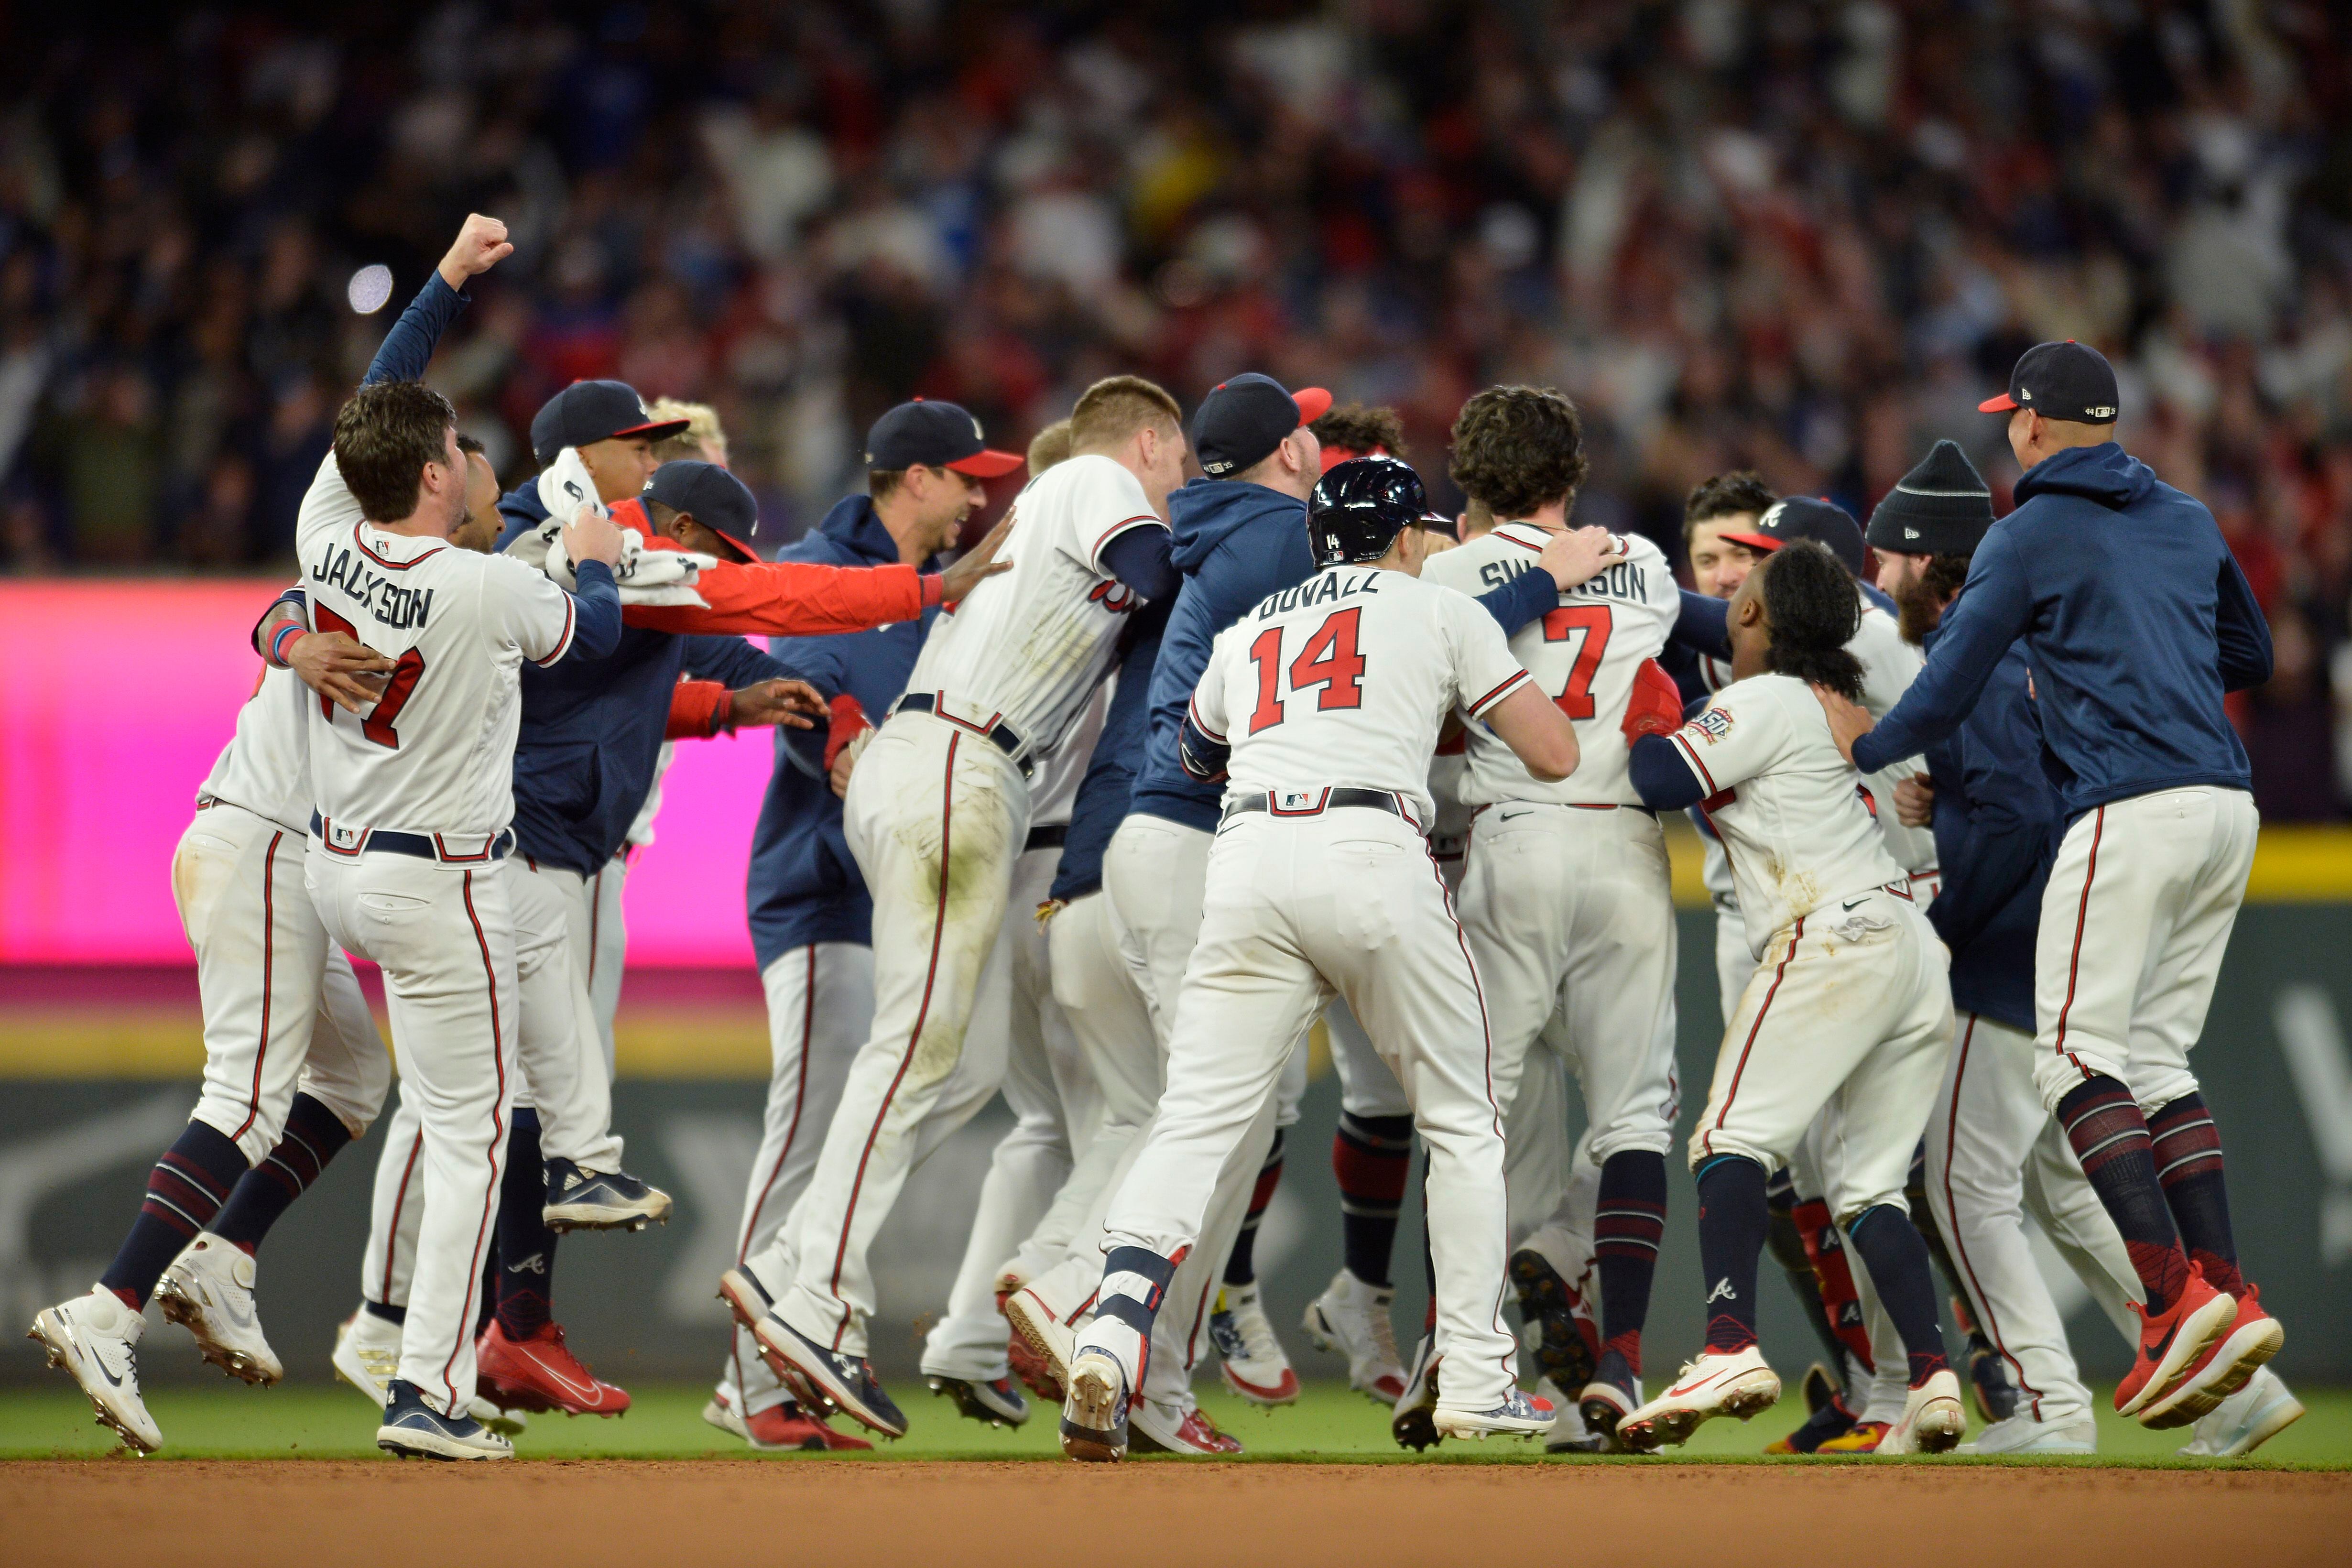 Unlikely hero delivers walk-off win for Braves